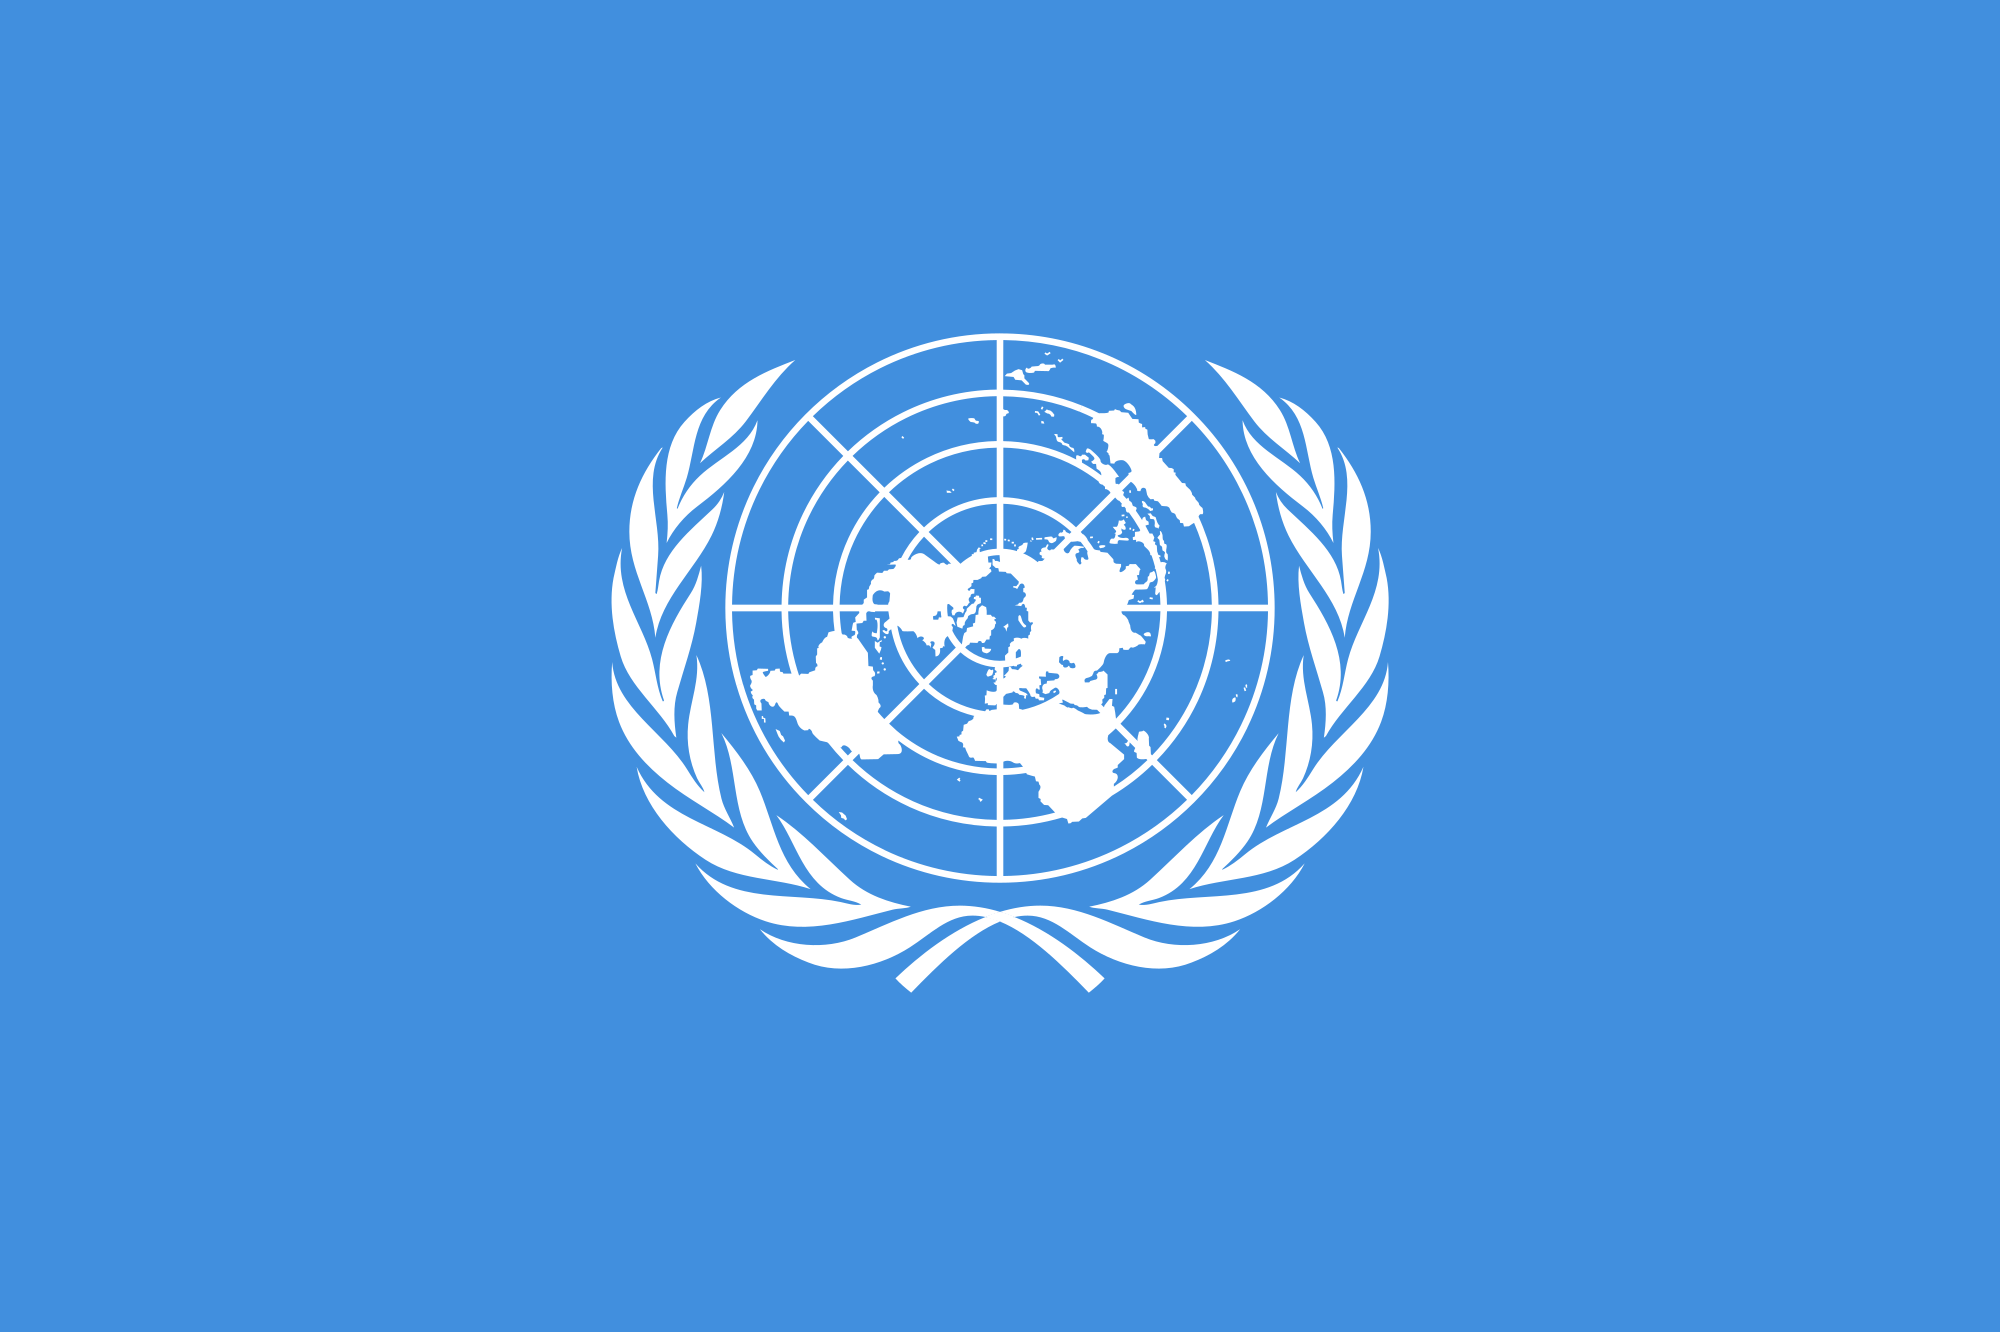 Branches with Globe Logo - Flag of the United Nations